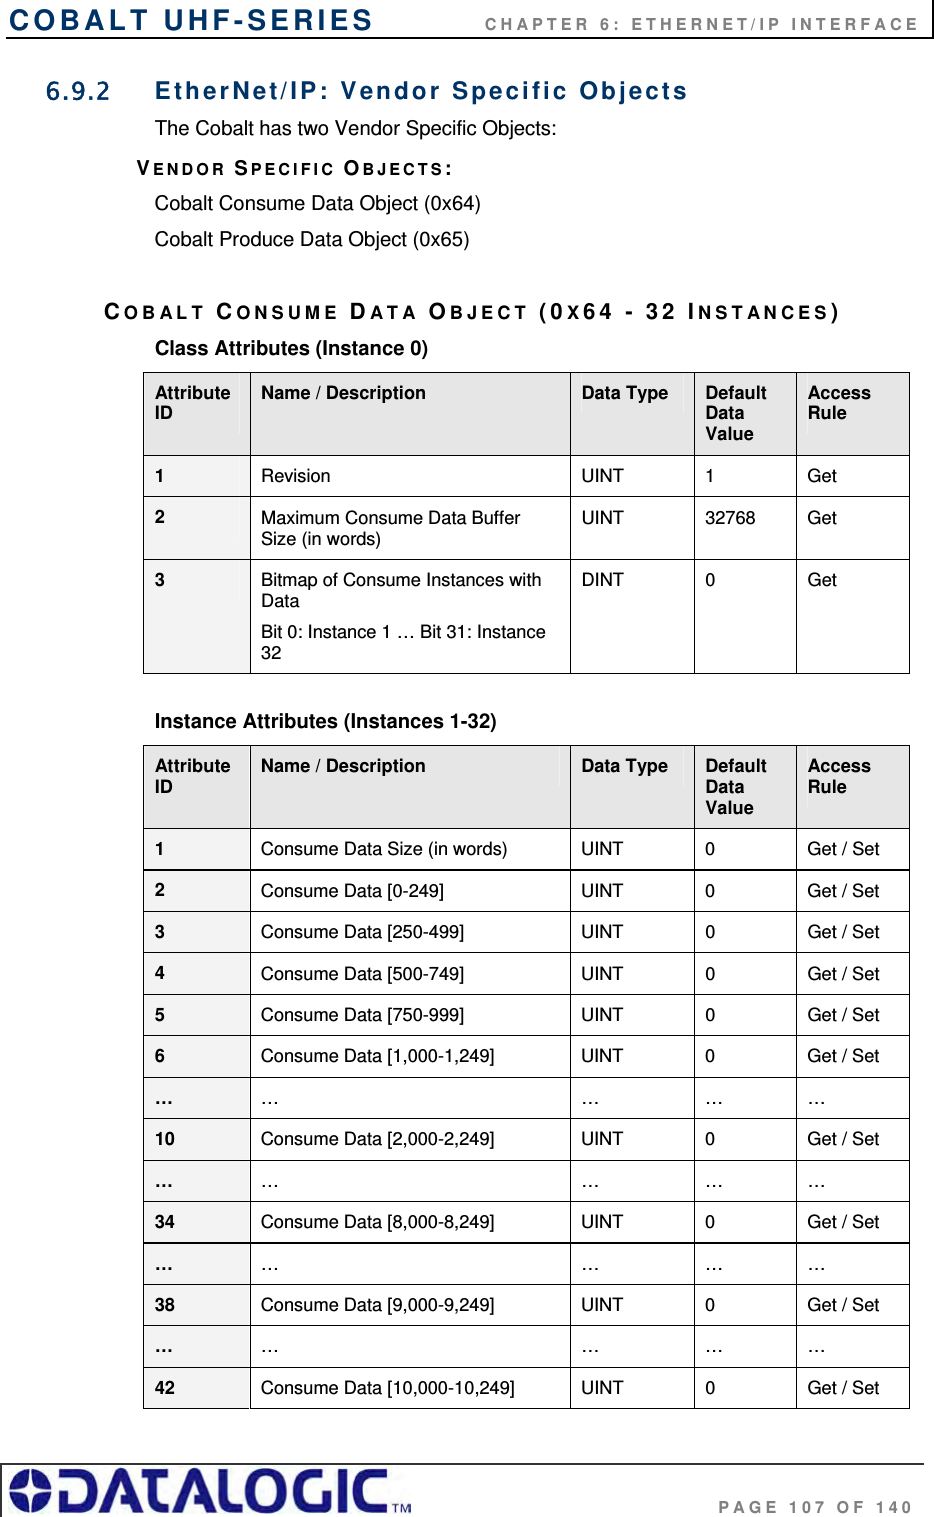 COBALT UHF-SERIES    CHAPTER 6: ETHERNET/IP INTERFACE                                     PAGE 107 OF 140 6.9.2  EtherNet/IP: Vendor Specific Objects The Cobalt has two Vendor Specific Objects: VENDOR SPECIFIC OBJECTS:  Cobalt Consume Data Object (0x64)  Cobalt Produce Data Object (0x65)   COBALT CONSUME DATA OBJECT (0X64 - 32 INSTANCES) Class Attributes (Instance 0) Attribute ID  Name / Description  Data Type  Default Data Value Access Rule 1  Revision UINT 1 Get 2  Maximum Consume Data Buffer Size (in words) UINT 32768 Get 3  Bitmap of Consume Instances with Data Bit 0: Instance 1 … Bit 31: Instance 32 DINT 0  Get  Instance Attributes (Instances 1-32) Attribute ID Name / Description  Data Type  Default Data Value Access Rule 1  Consume Data Size (in words)  UINT  0  Get / Set 2  Consume Data [0-249]  UINT  0  Get / Set 3  Consume Data [250-499]  UINT  0  Get / Set 4  Consume Data [500-749]  UINT  0  Get / Set 5  Consume Data [750-999]  UINT  0  Get / Set 6  Consume Data [1,000-1,249]  UINT  0  Get / Set …  … … … … 10  Consume Data [2,000-2,249]  UINT  0  Get / Set …  … … … … 34  Consume Data [8,000-8,249]  UINT  0  Get / Set …  … … … … 38  Consume Data [9,000-9,249]  UINT  0  Get / Set …  … … … … 42  Consume Data [10,000-10,249]  UINT  0  Get / Set 